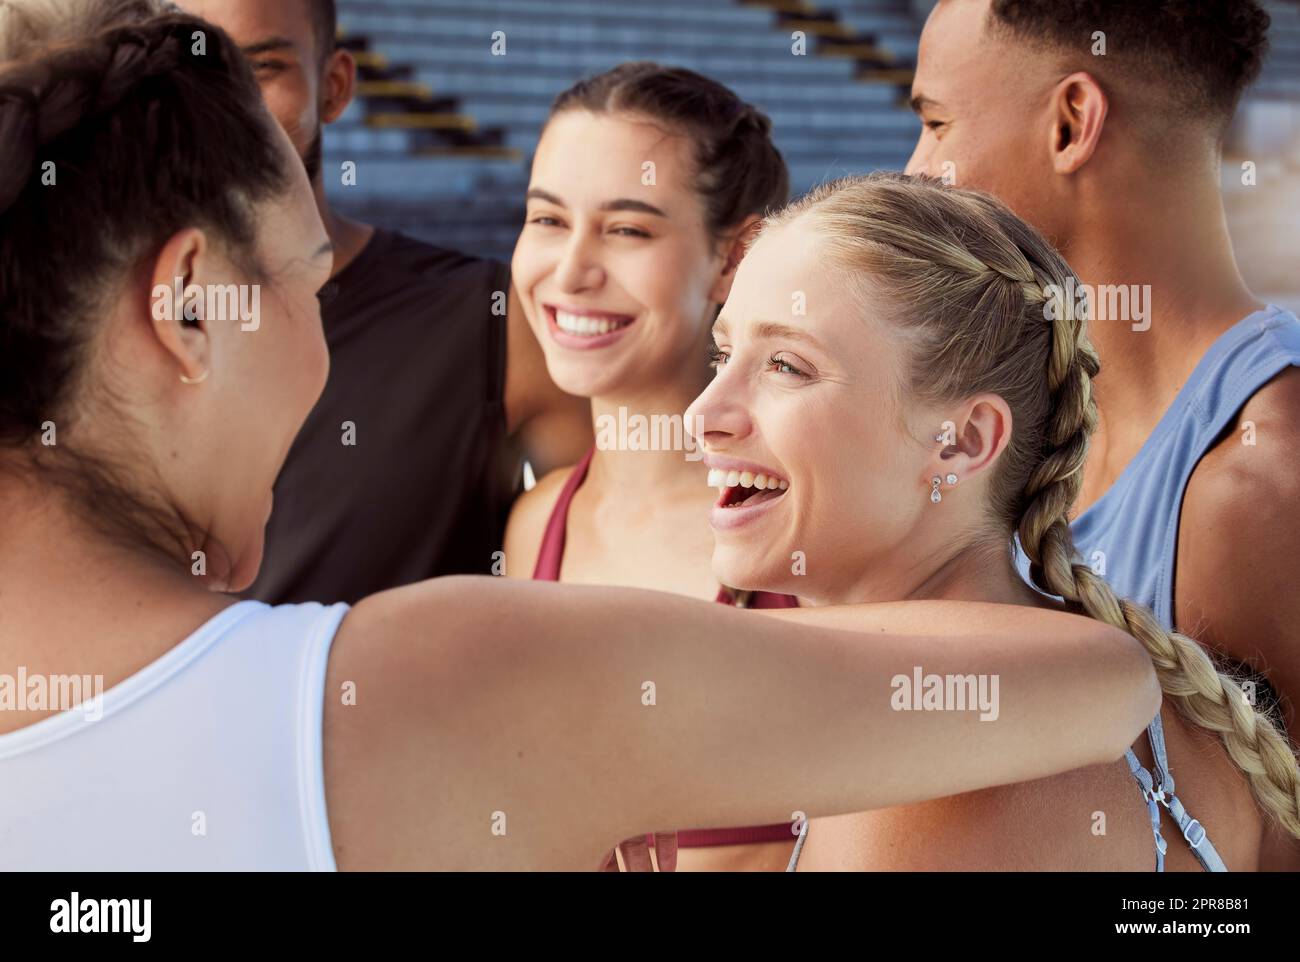 Diverse group of athletes standing together and smiling after practice. Young, happy, fit, active people bonding after training in sports centre. Athletic men and women after healthy exercise workout Stock Photo